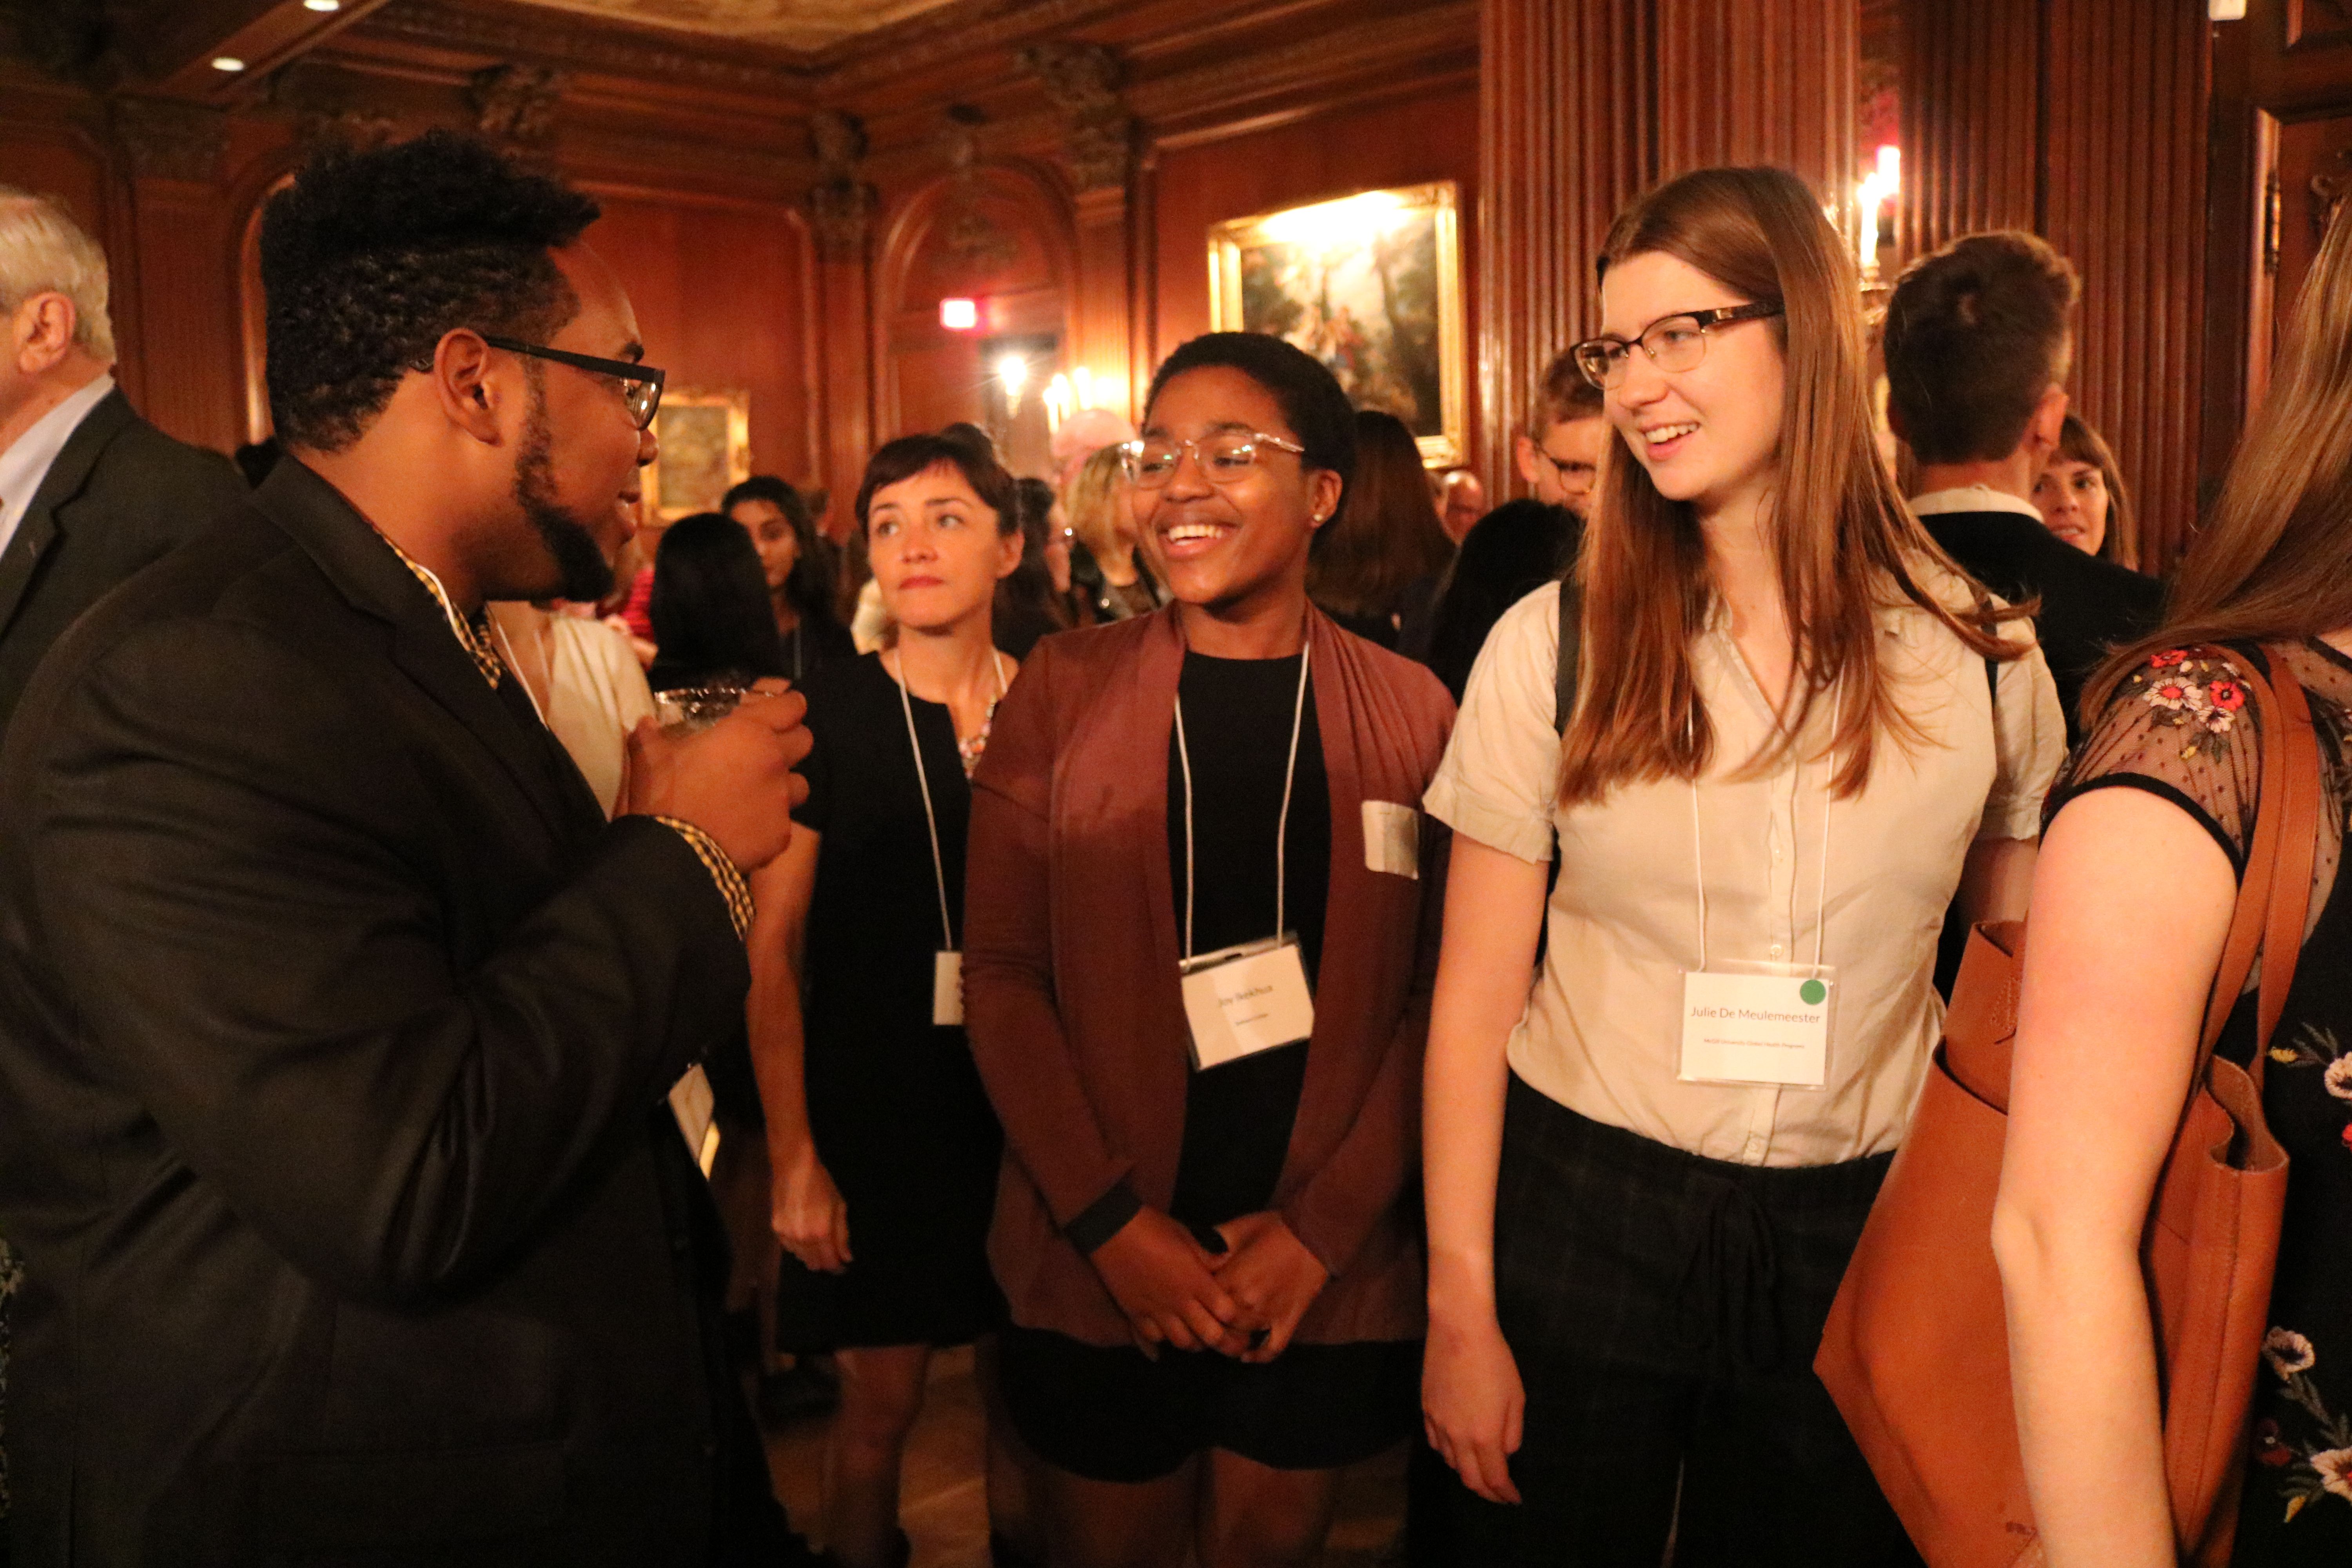 Student fellows Jonathan Custodio, Joy Ikekhua, and Julie De Meulemeester at the evening dinner. Behind them is Pulitzer Center grantee Allison Shelley. Image by Karena Phan. United States, 2018.